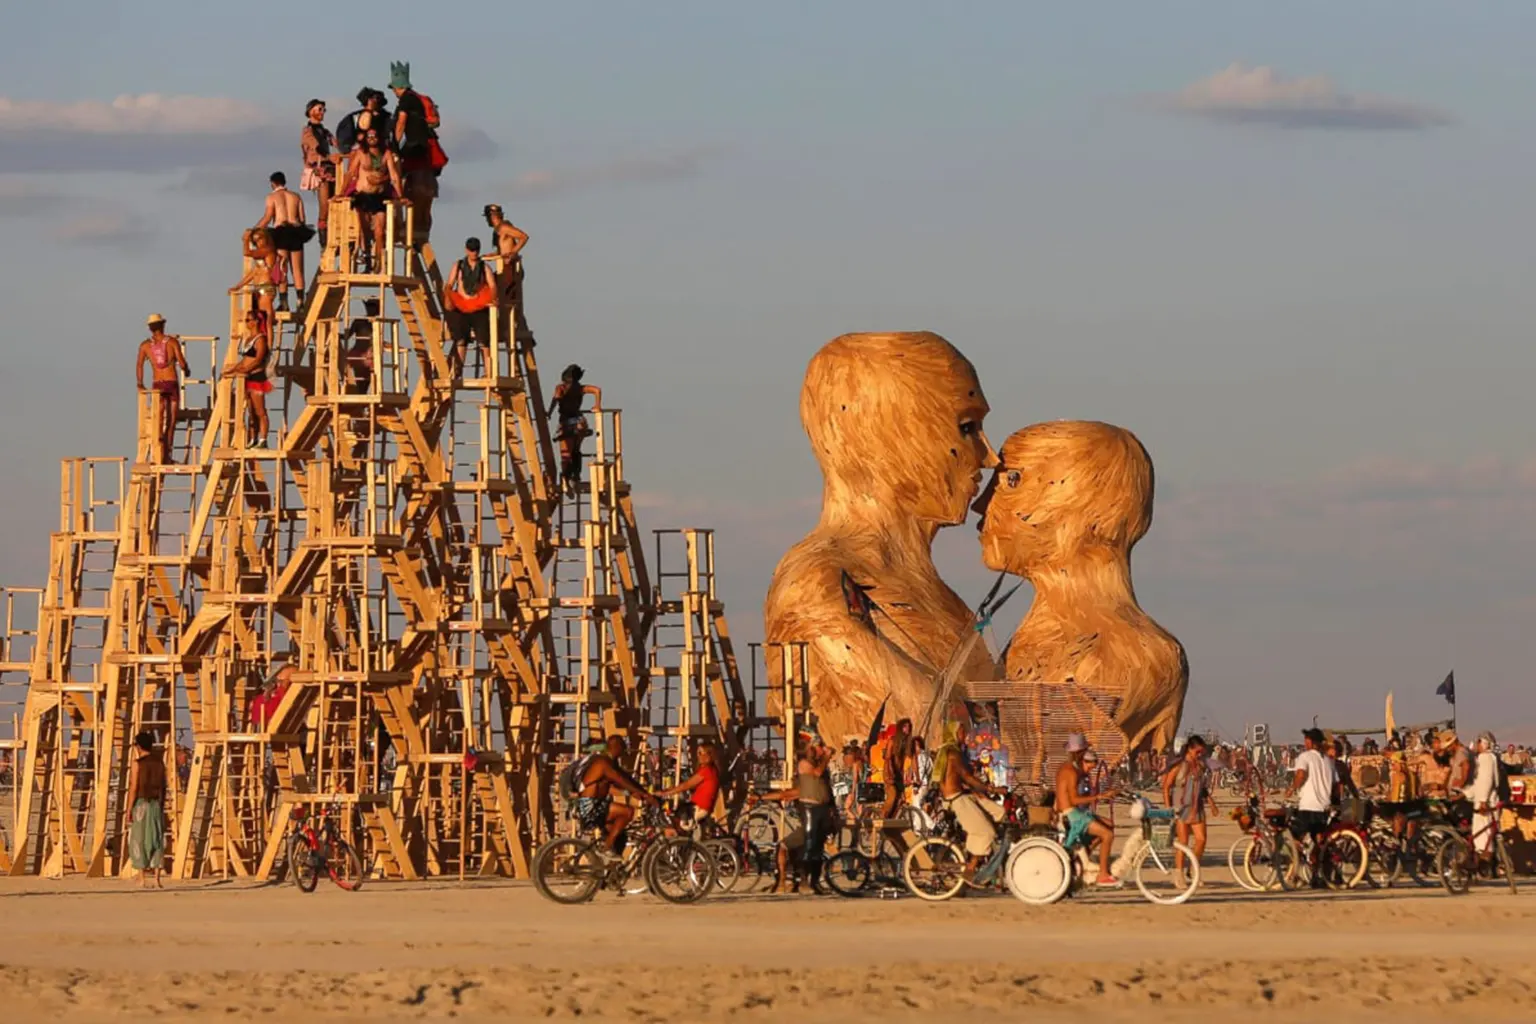 6. The Best Time to Visit is During the Annual Burning Man Festival, Usually Held in Late August to Early September